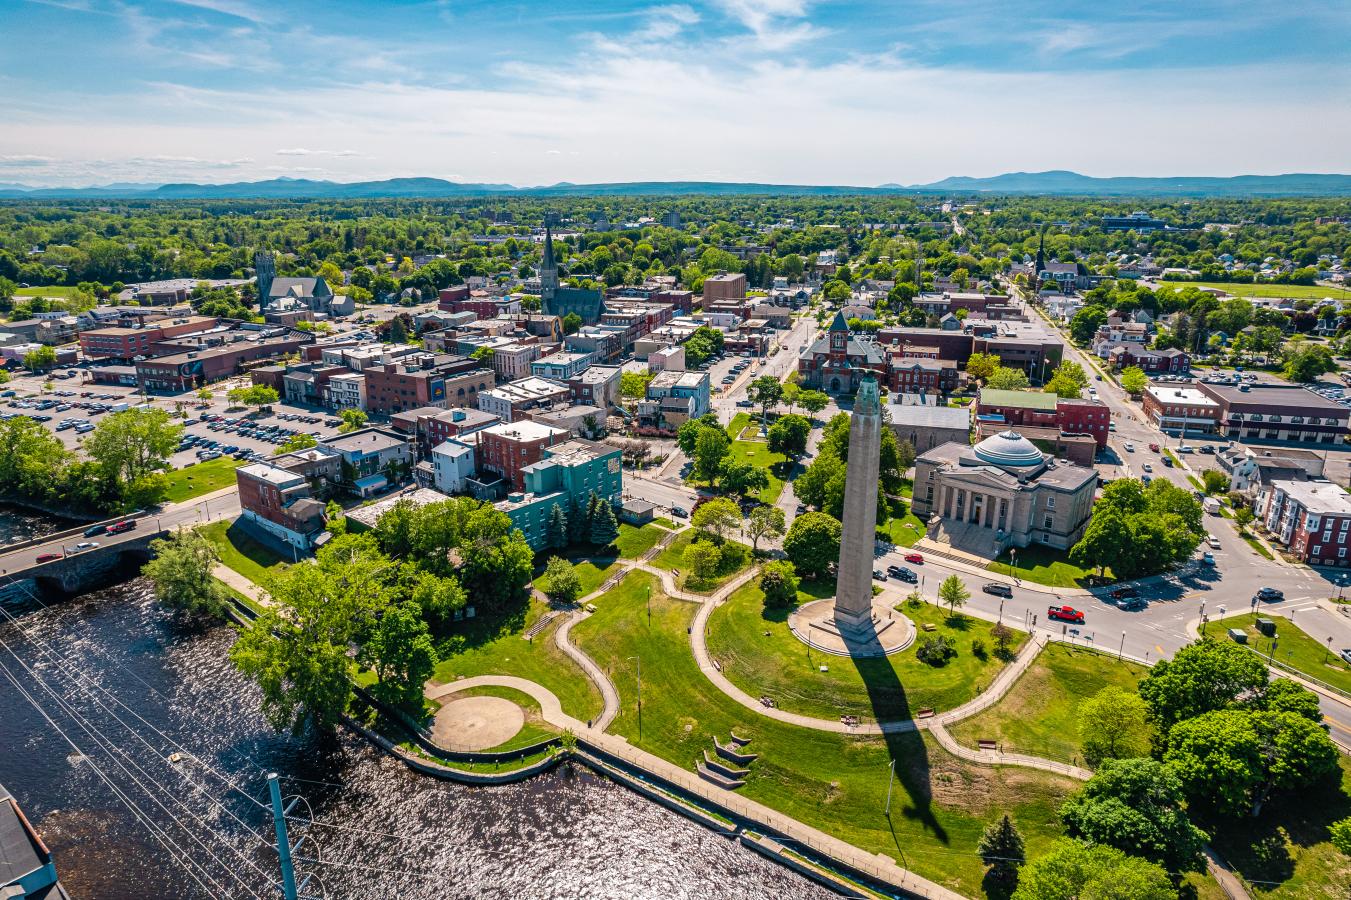 An aerial view of Plattsburgh, NY